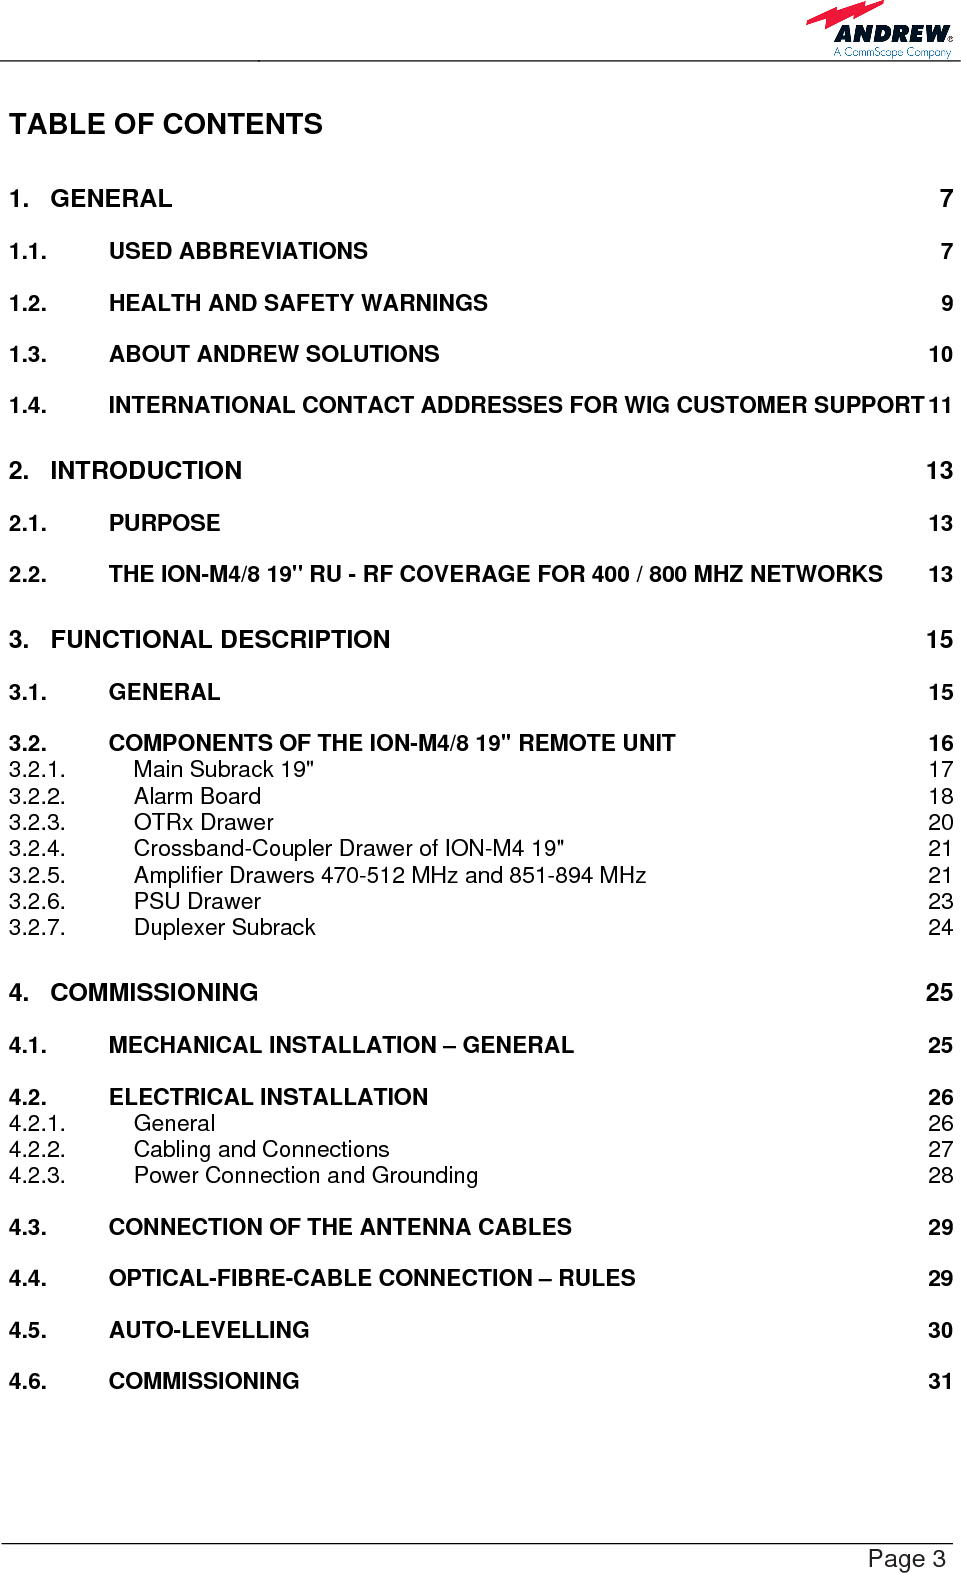    Page 3 TABLE OF CONTENTS 1. GENERAL 7 1.1. USED ABBREVIATIONS  7 1.2. HEALTH AND SAFETY WARNINGS  9 1.3. ABOUT ANDREW SOLUTIONS  10 1.4. INTERNATIONAL CONTACT ADDRESSES FOR WIG CUSTOMER SUPPORT 11 2. INTRODUCTION 13 2.1. PURPOSE 13 2.2. THE ION-M4/8 19&quot; RU - RF COVERAGE FOR 400 / 800 MHZ NETWORKS  13 3. FUNCTIONAL DESCRIPTION  15 3.1. GENERAL 15 3.2. COMPONENTS OF THE ION-M4/8 19&quot; REMOTE UNIT  16 3.2.1. Main Subrack 19&quot;  17 3.2.2. Alarm Board  18 3.2.3. OTRx Drawer  20 3.2.4. Crossband-Coupler Drawer of ION-M4 19&quot;  21 3.2.5. Amplifier Drawers 470-512 MHz and 851-894 MHz  21 3.2.6. PSU Drawer  23 3.2.7. Duplexer Subrack  24 4. COMMISSIONING 25 4.1. MECHANICAL INSTALLATION – GENERAL  25 4.2. ELECTRICAL INSTALLATION  26 4.2.1. General 26 4.2.2. Cabling and Connections  27 4.2.3. Power Connection and Grounding  28 4.3. CONNECTION OF THE ANTENNA CABLES  29 4.4. OPTICAL-FIBRE-CABLE CONNECTION – RULES  29 4.5. AUTO-LEVELLING 30 4.6. COMMISSIONING 31 